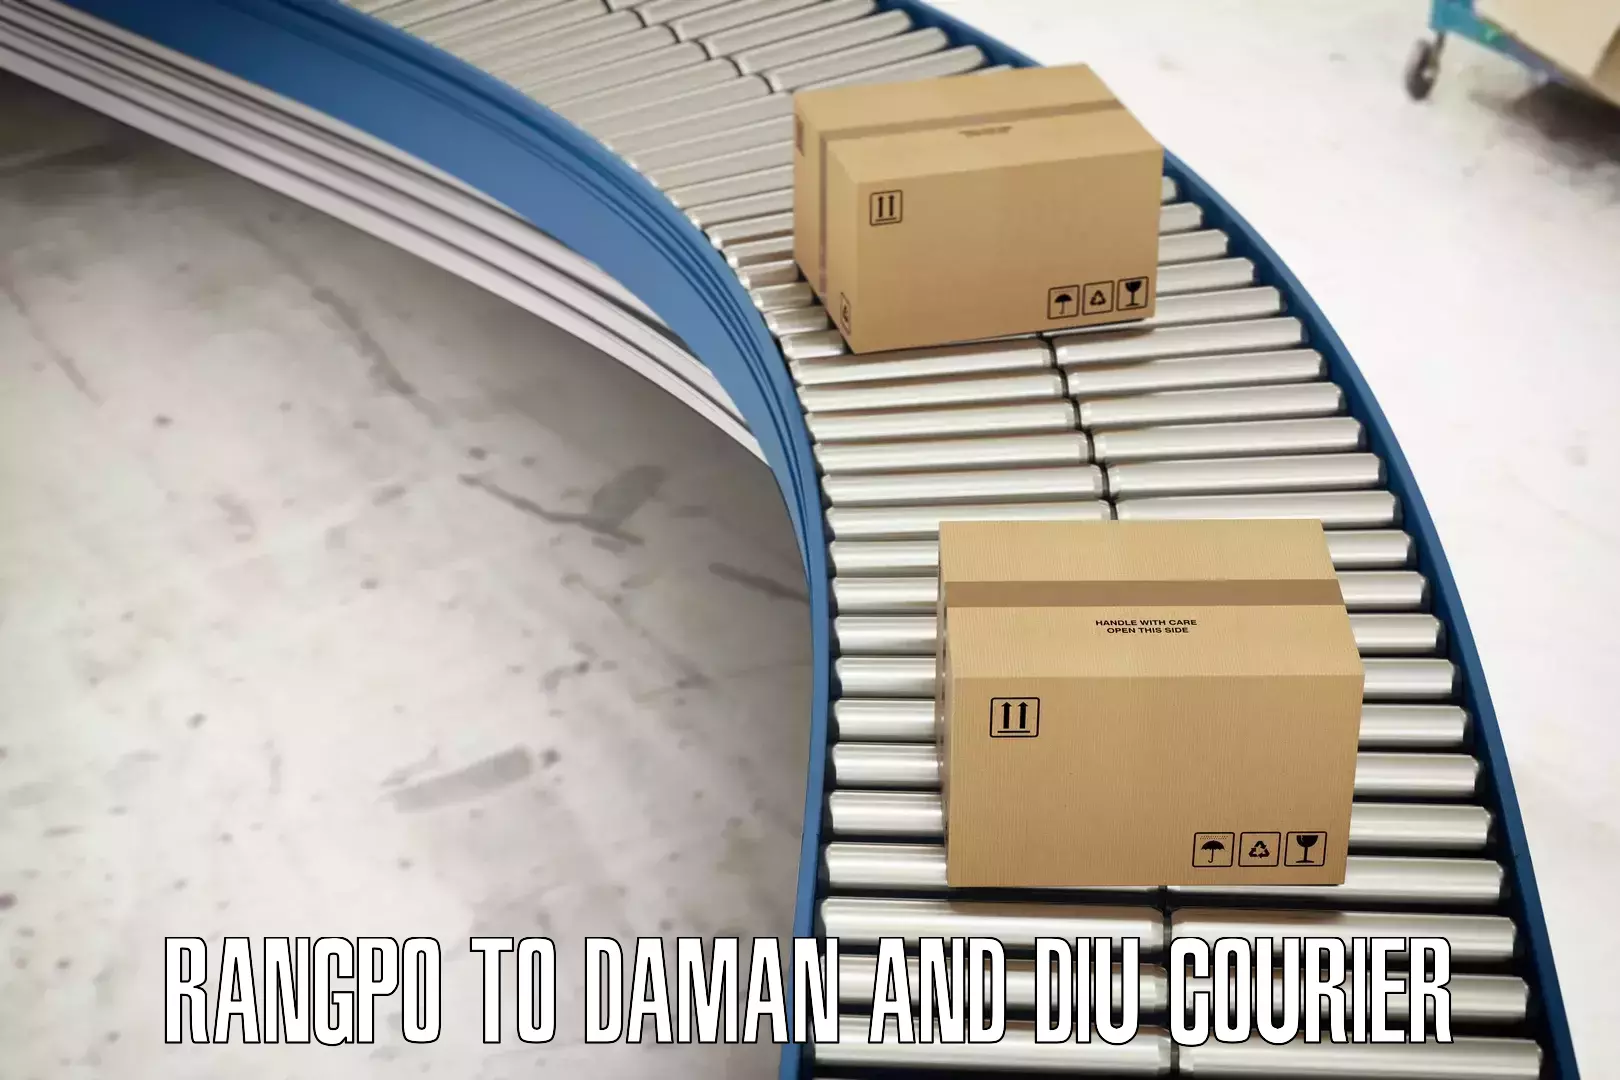 Quality courier services Rangpo to Daman